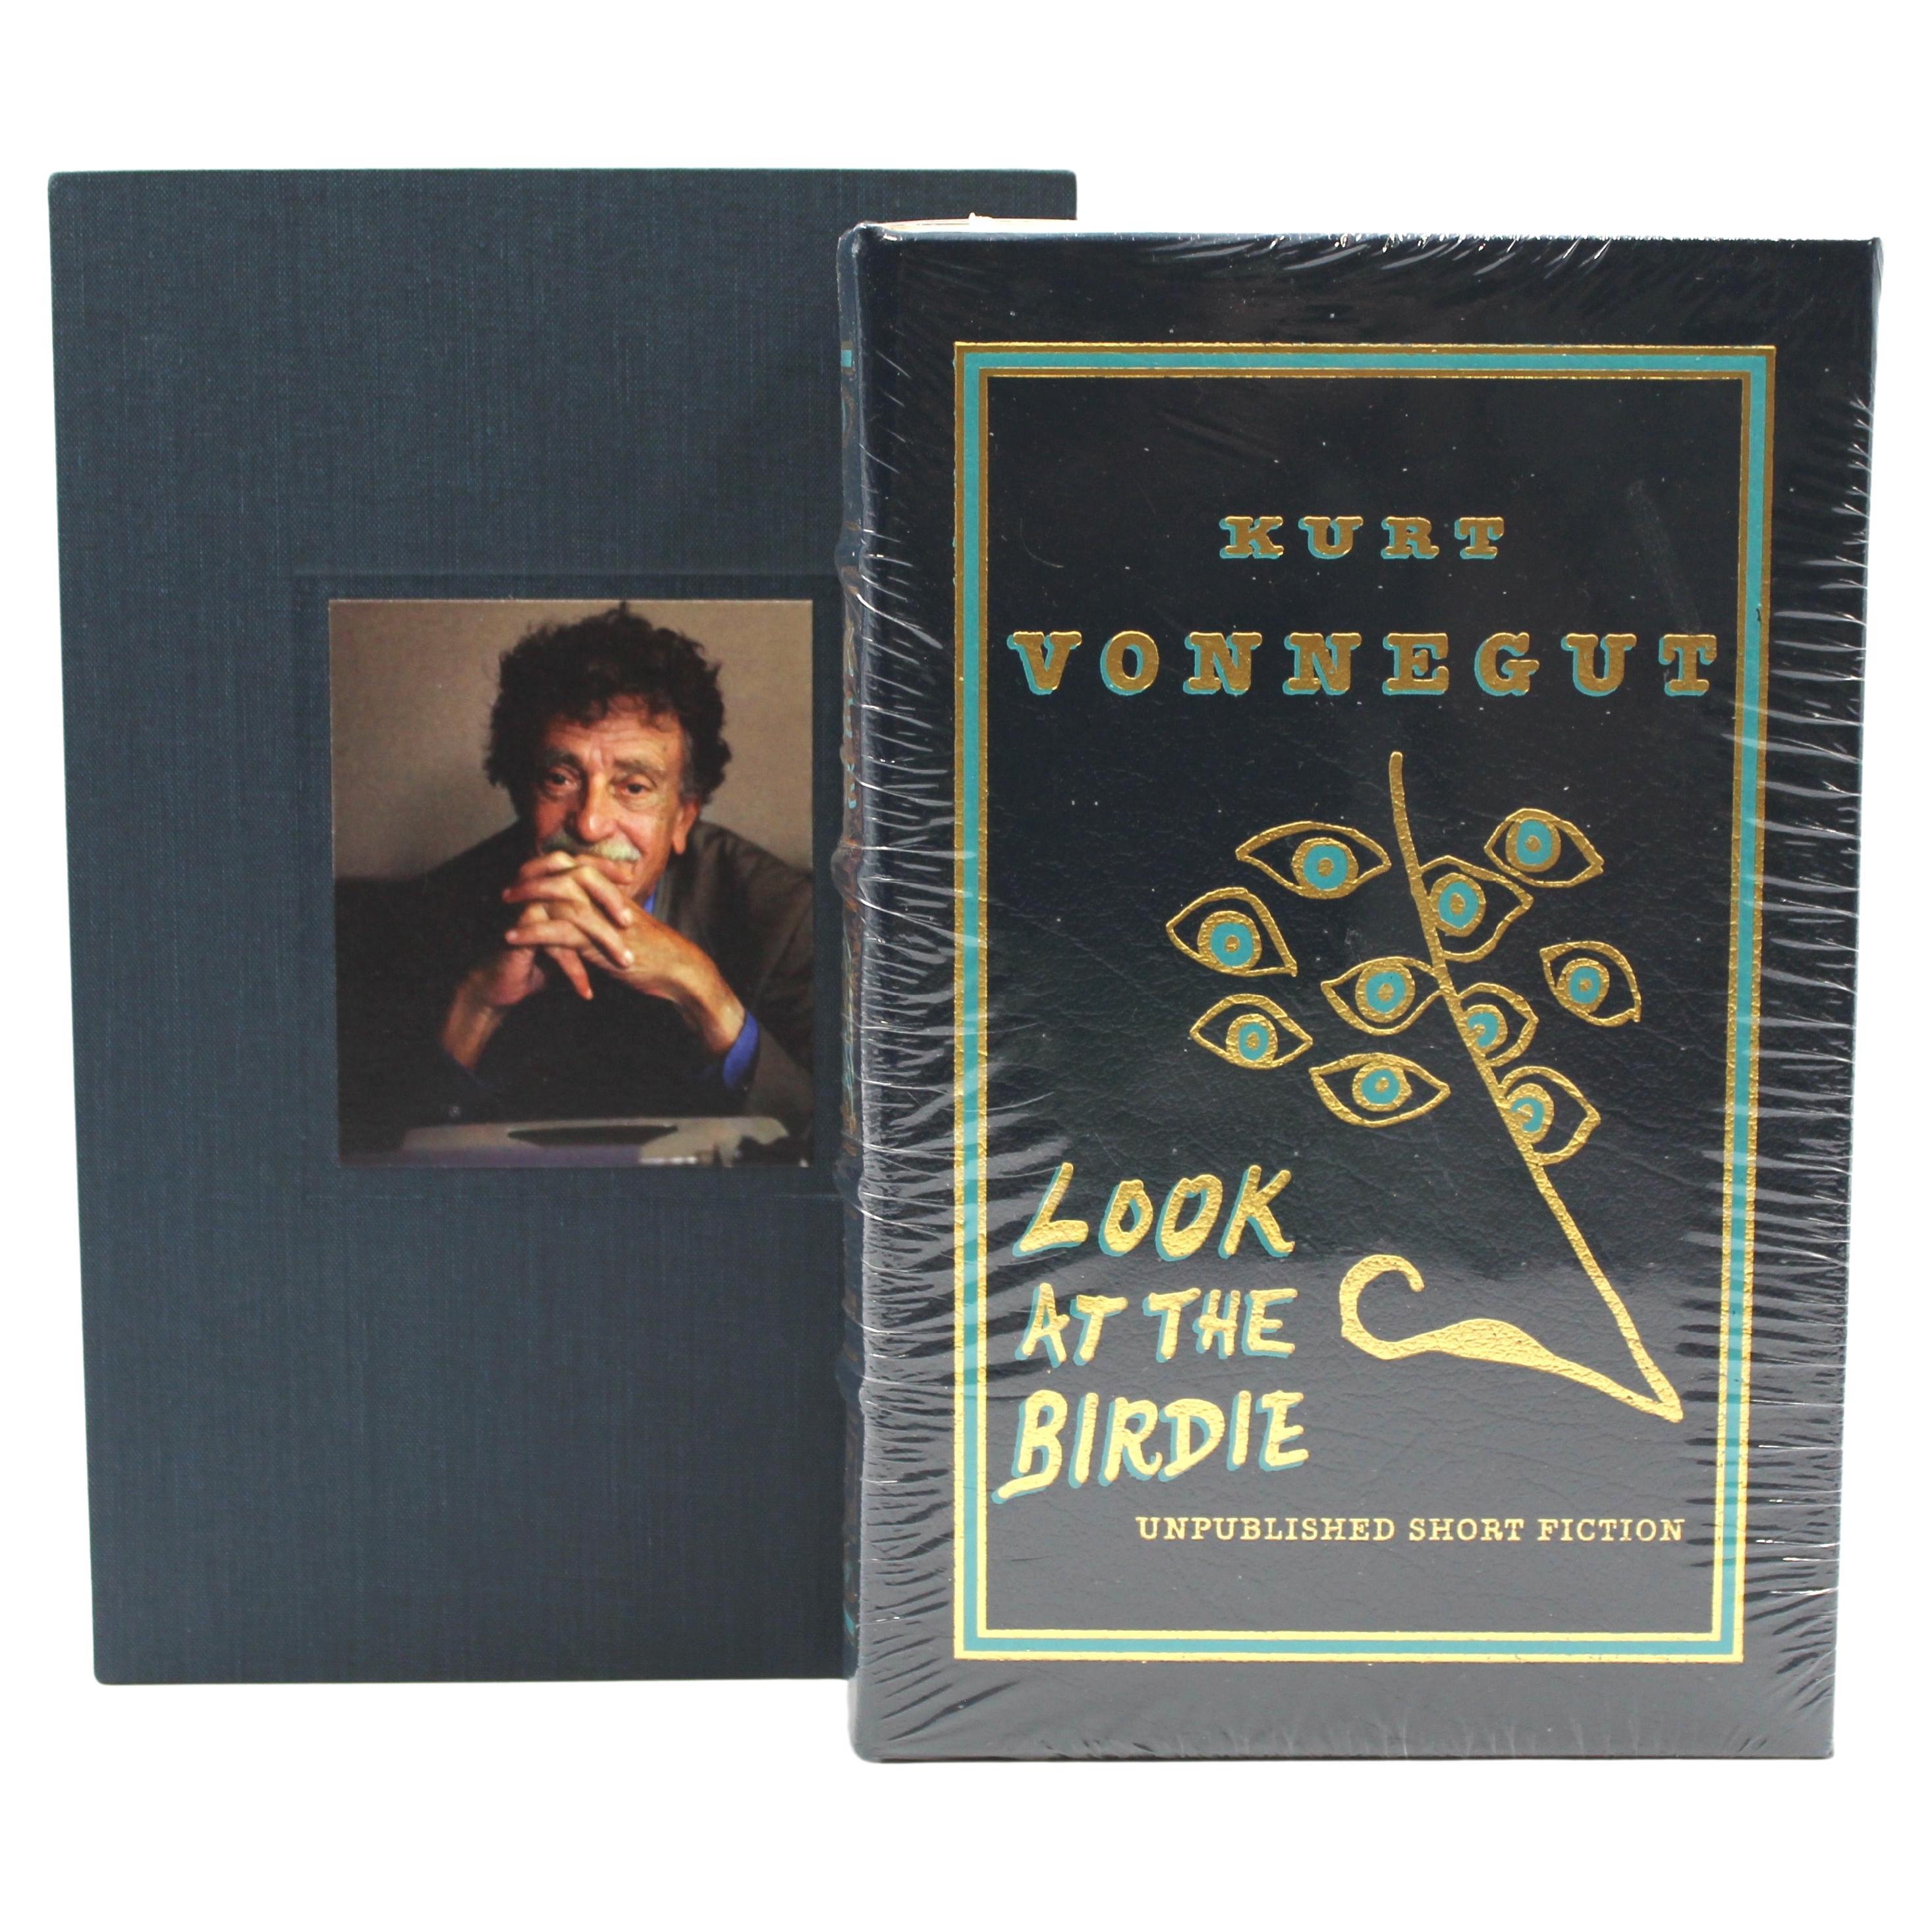 Look At The Birdie, Signed by Kurt Vonnegut, Easton Press Limited Edition, 2009